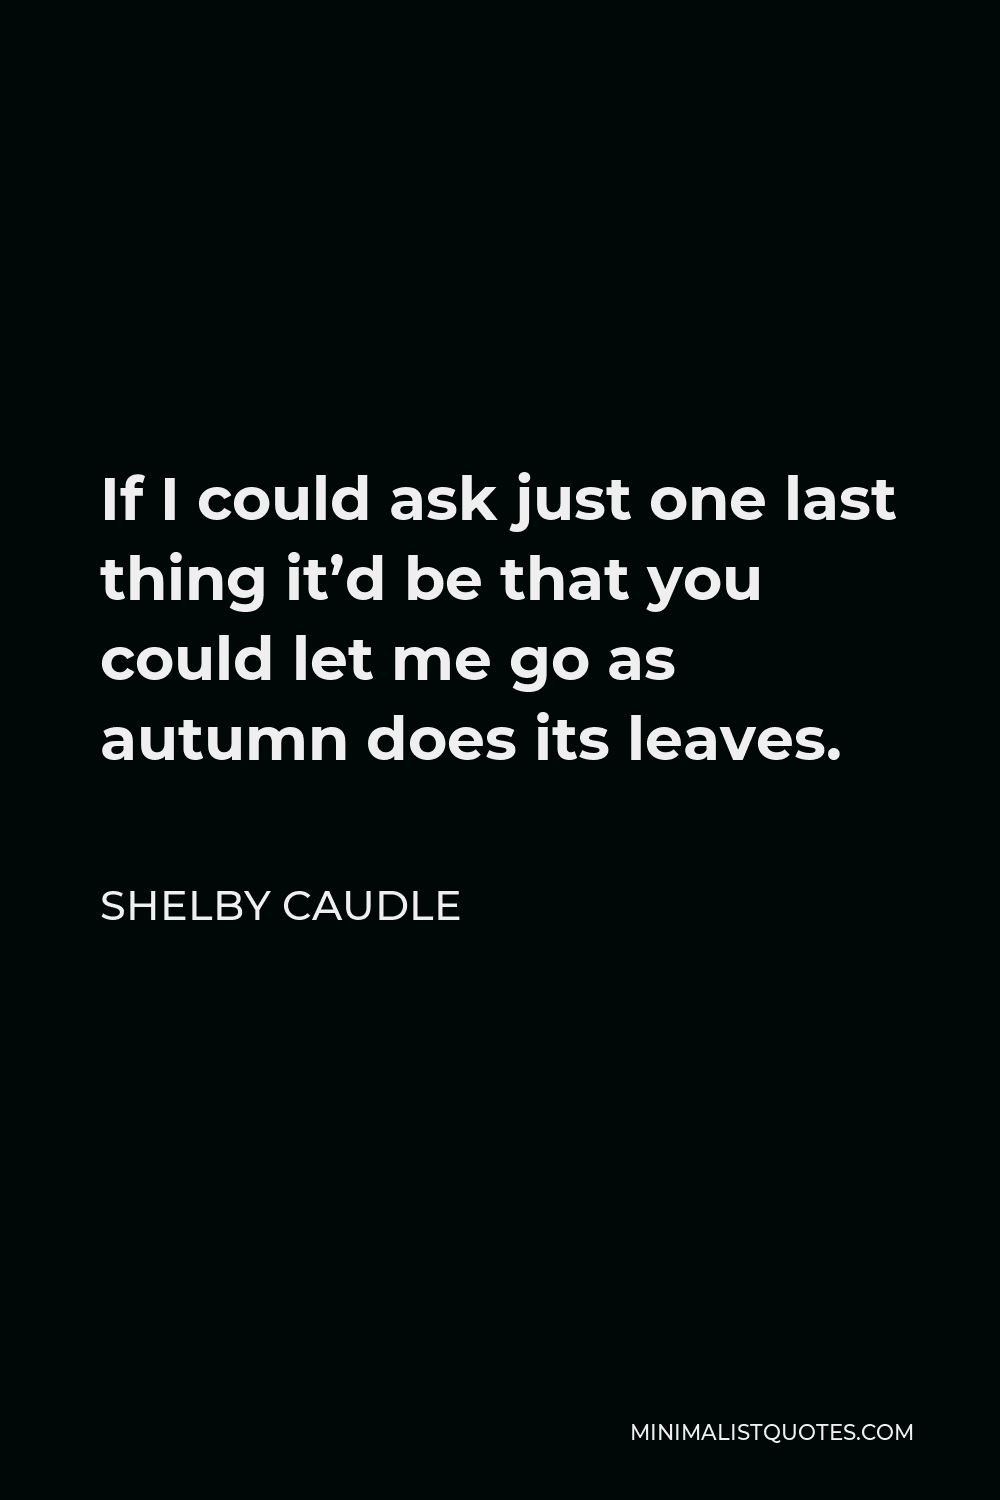 Shelby Caudle Quote - If I could ask just one last thing it’d be that you could let me go as autumn does its leaves.